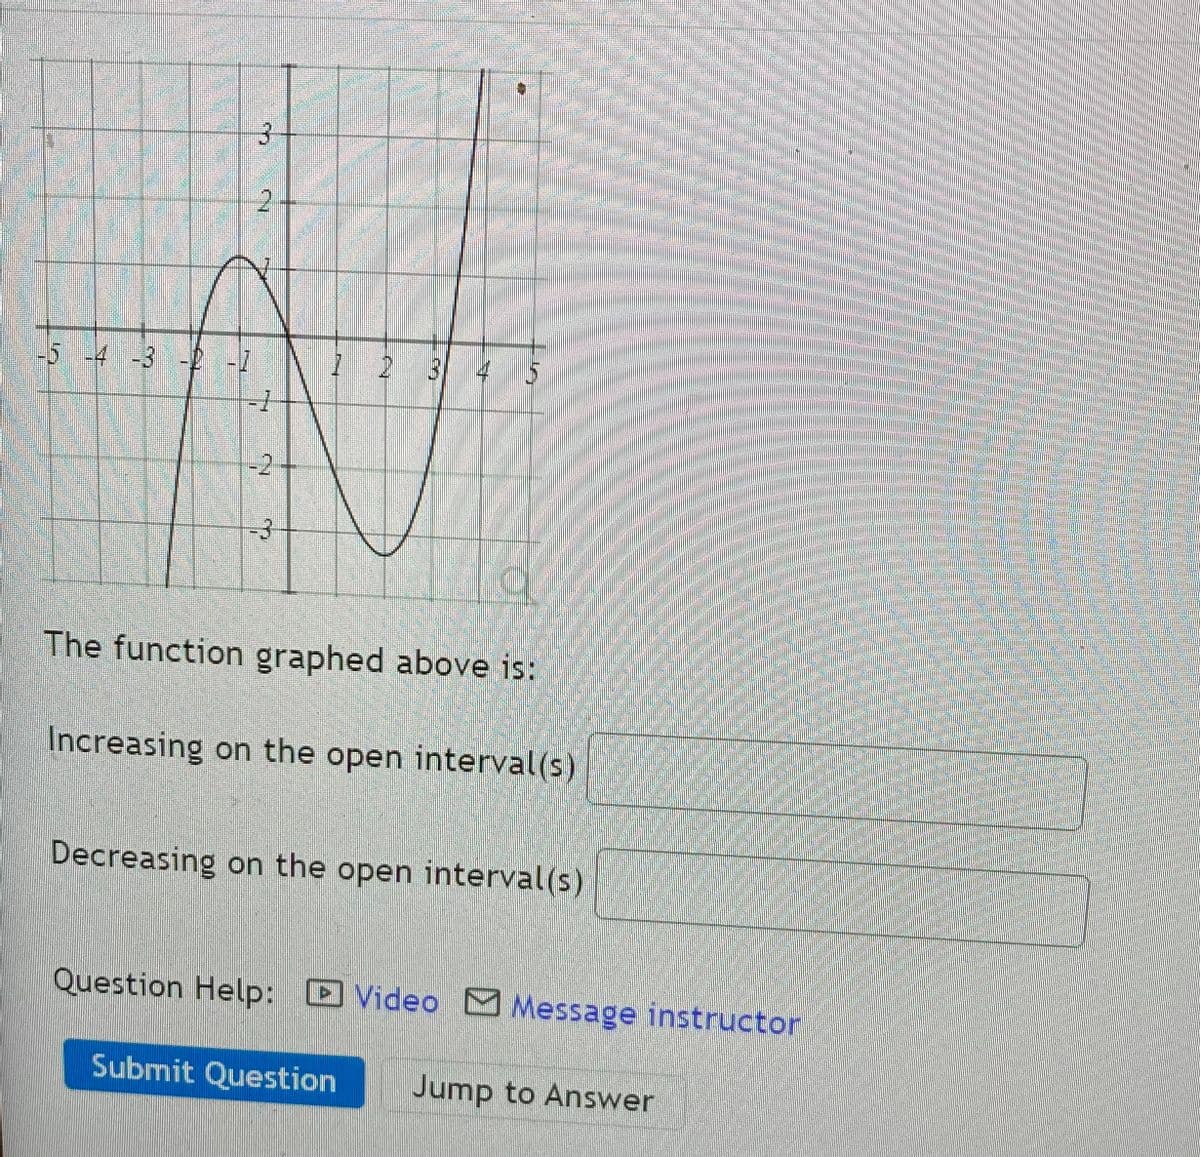 2.
54 -3 2-7
-2
-3
The function graphed above is:
Increasing on the open interval(s)
Decreasing on the open interval(s)
Question Help: Video M Message instructor
Submit Question
Jump to Answer
